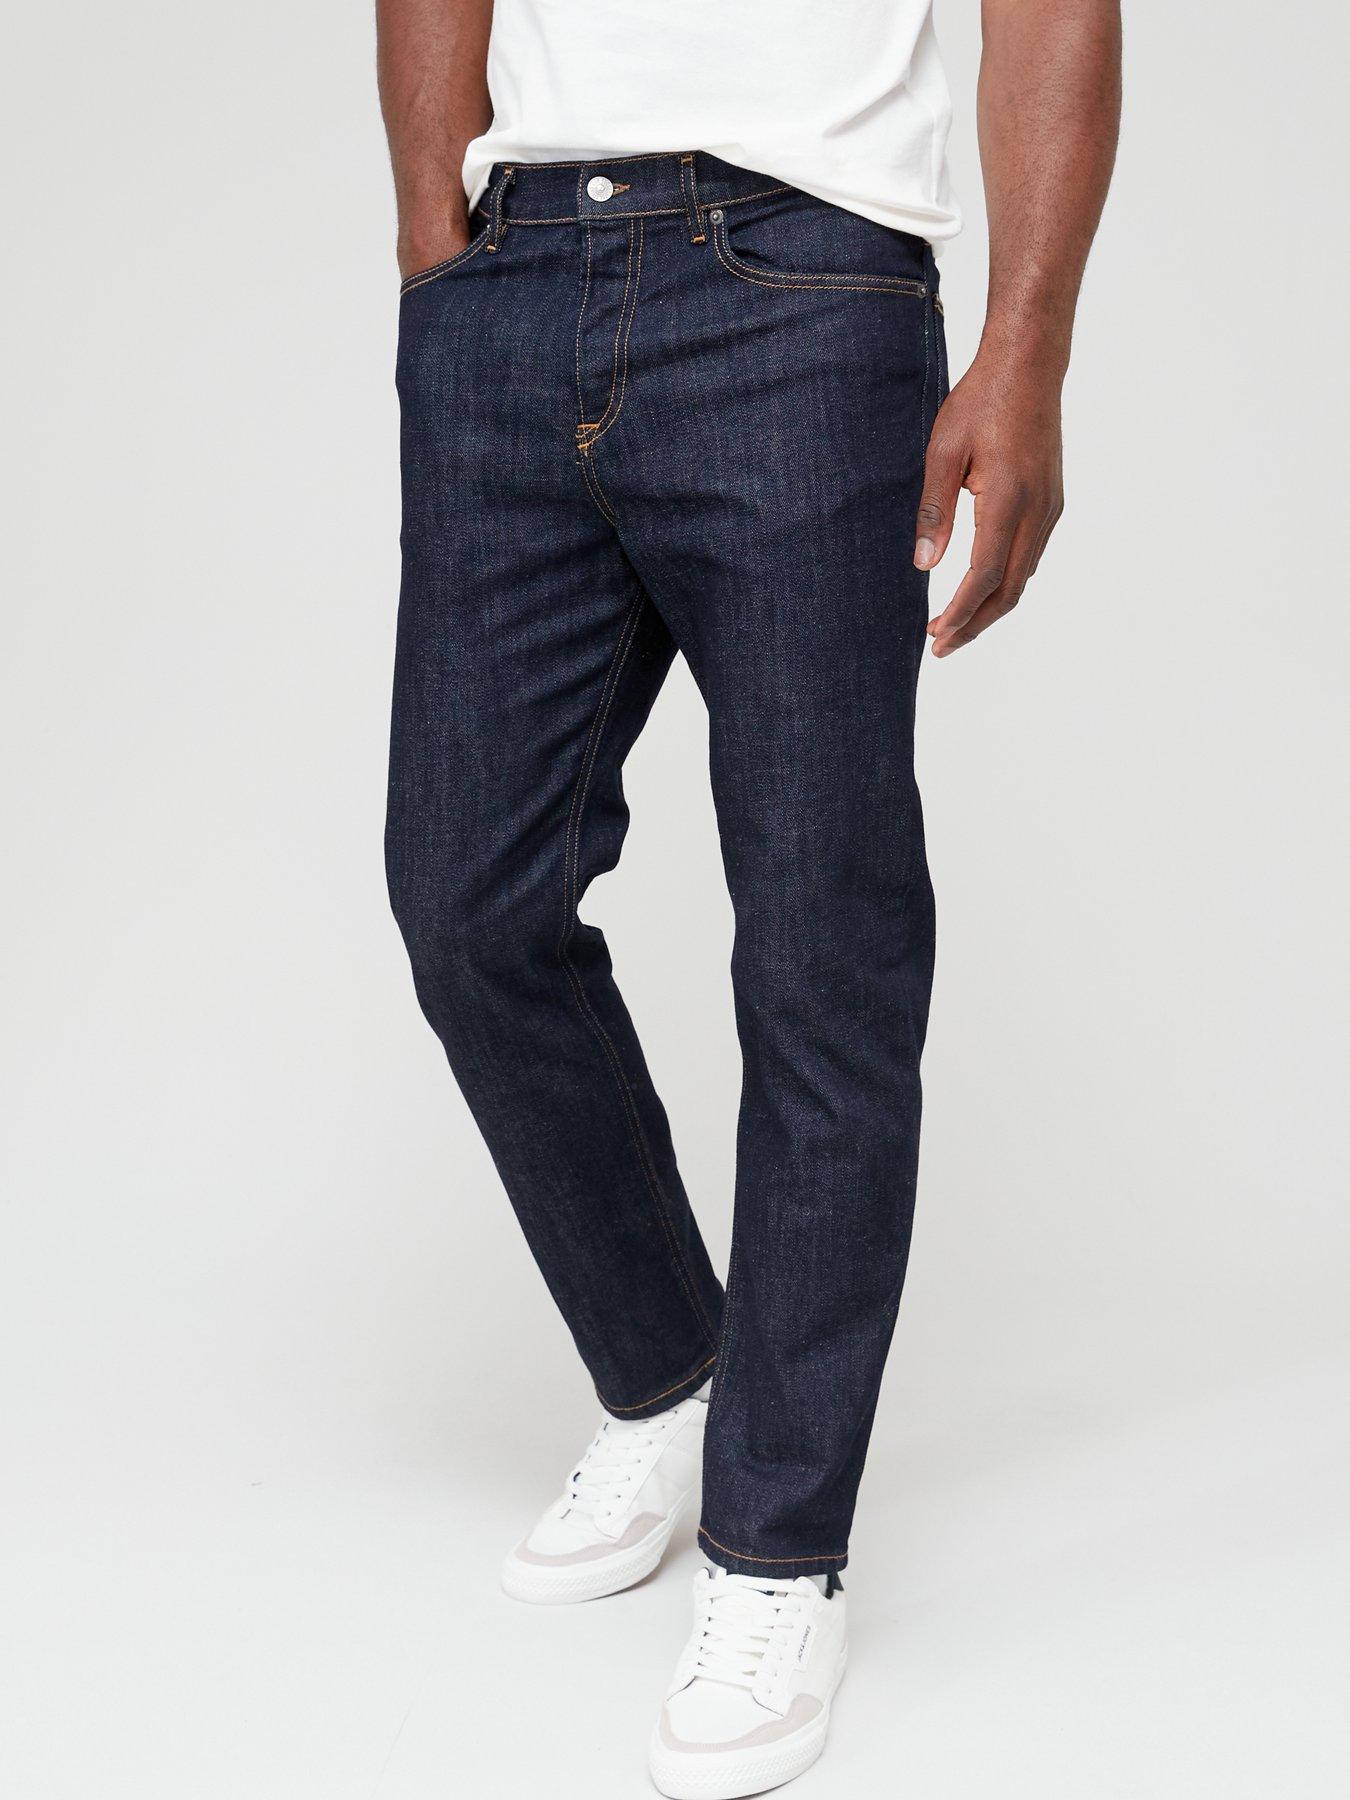 Lima Continuo Barón Diesel Mens Jeans | Shop Diesel Mens Jeans at Very.co.uk